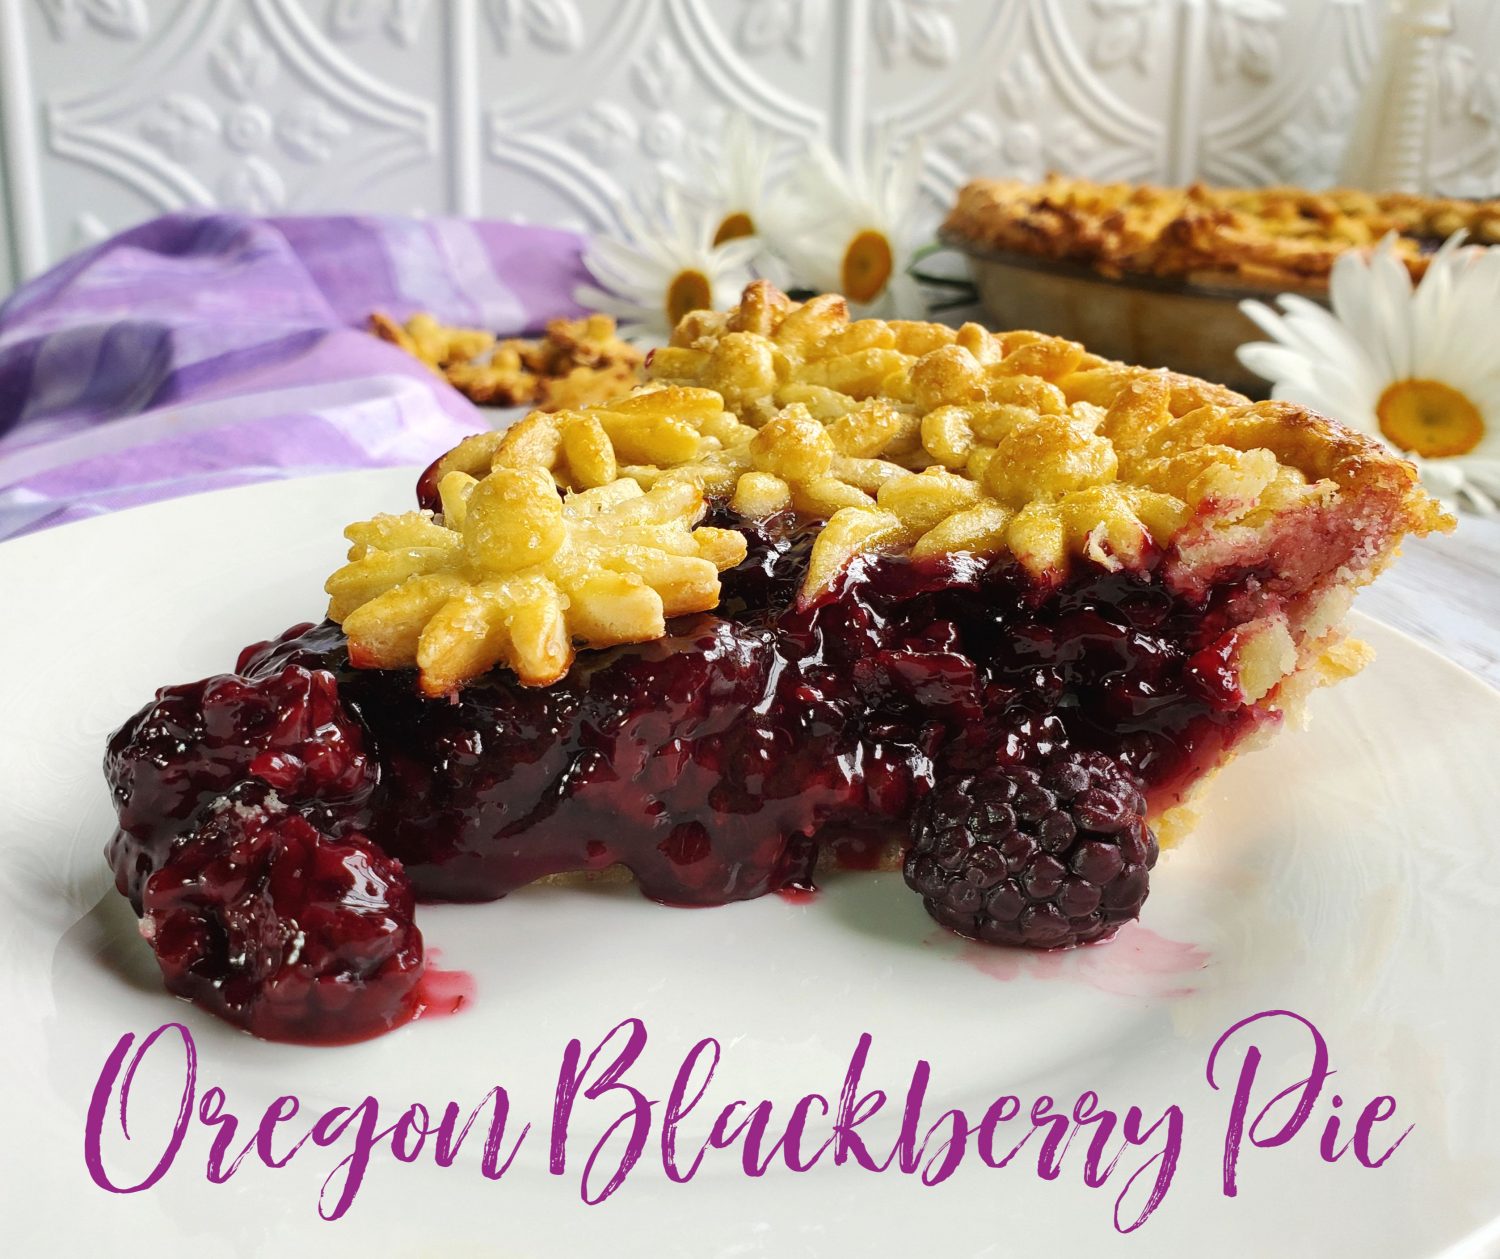 Oregon Blackberry Pie (aka Marionberry); best berries on the planet! Fresh picked blackberries baked in a super flaky crust: Very Berry-licious indeed.